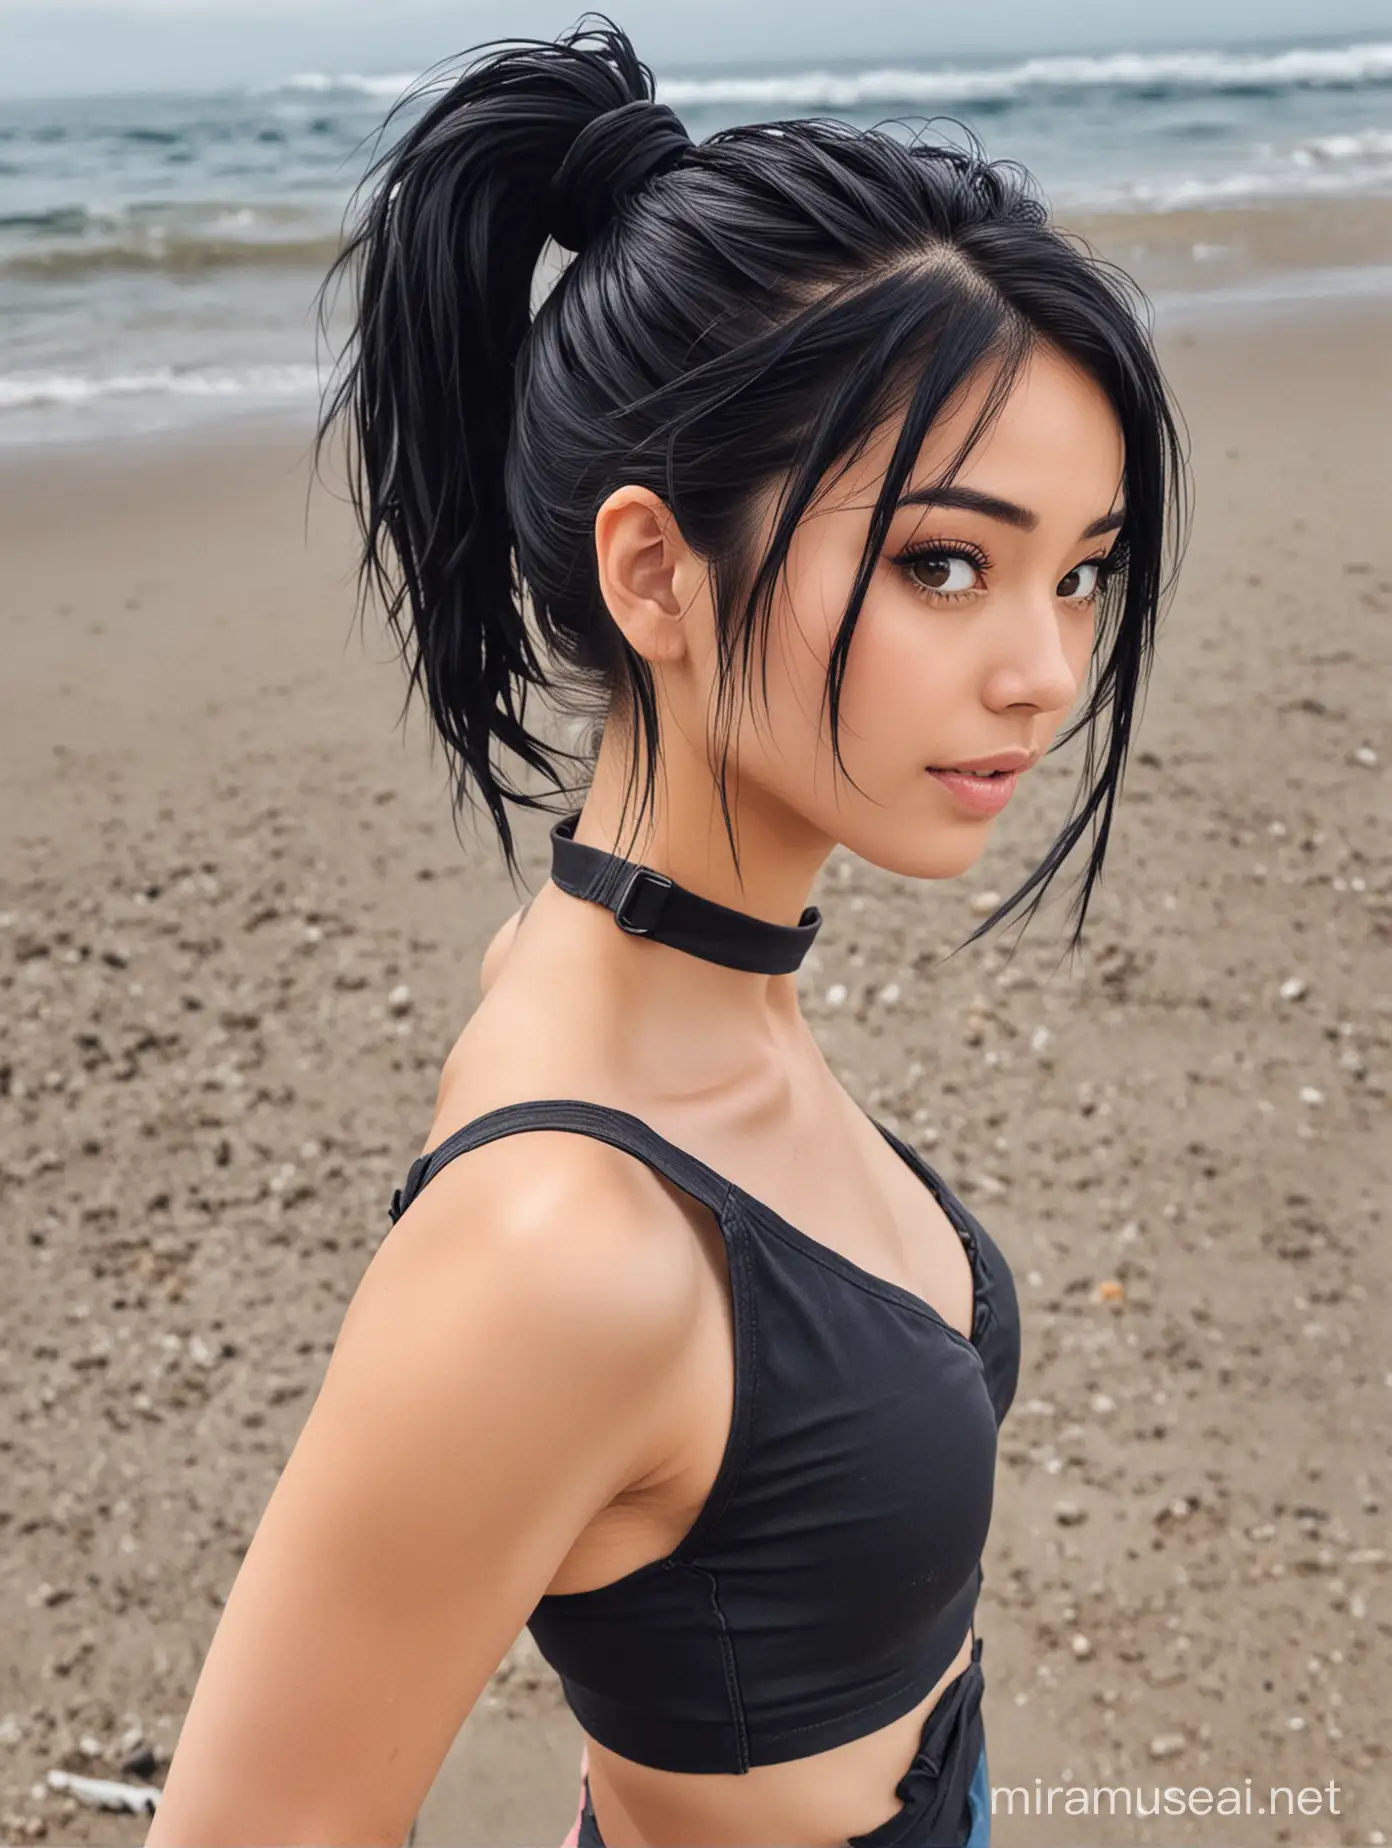 A woman with anime-style black hair tied up in a ponytail, wearing dark jeans and swim suit.